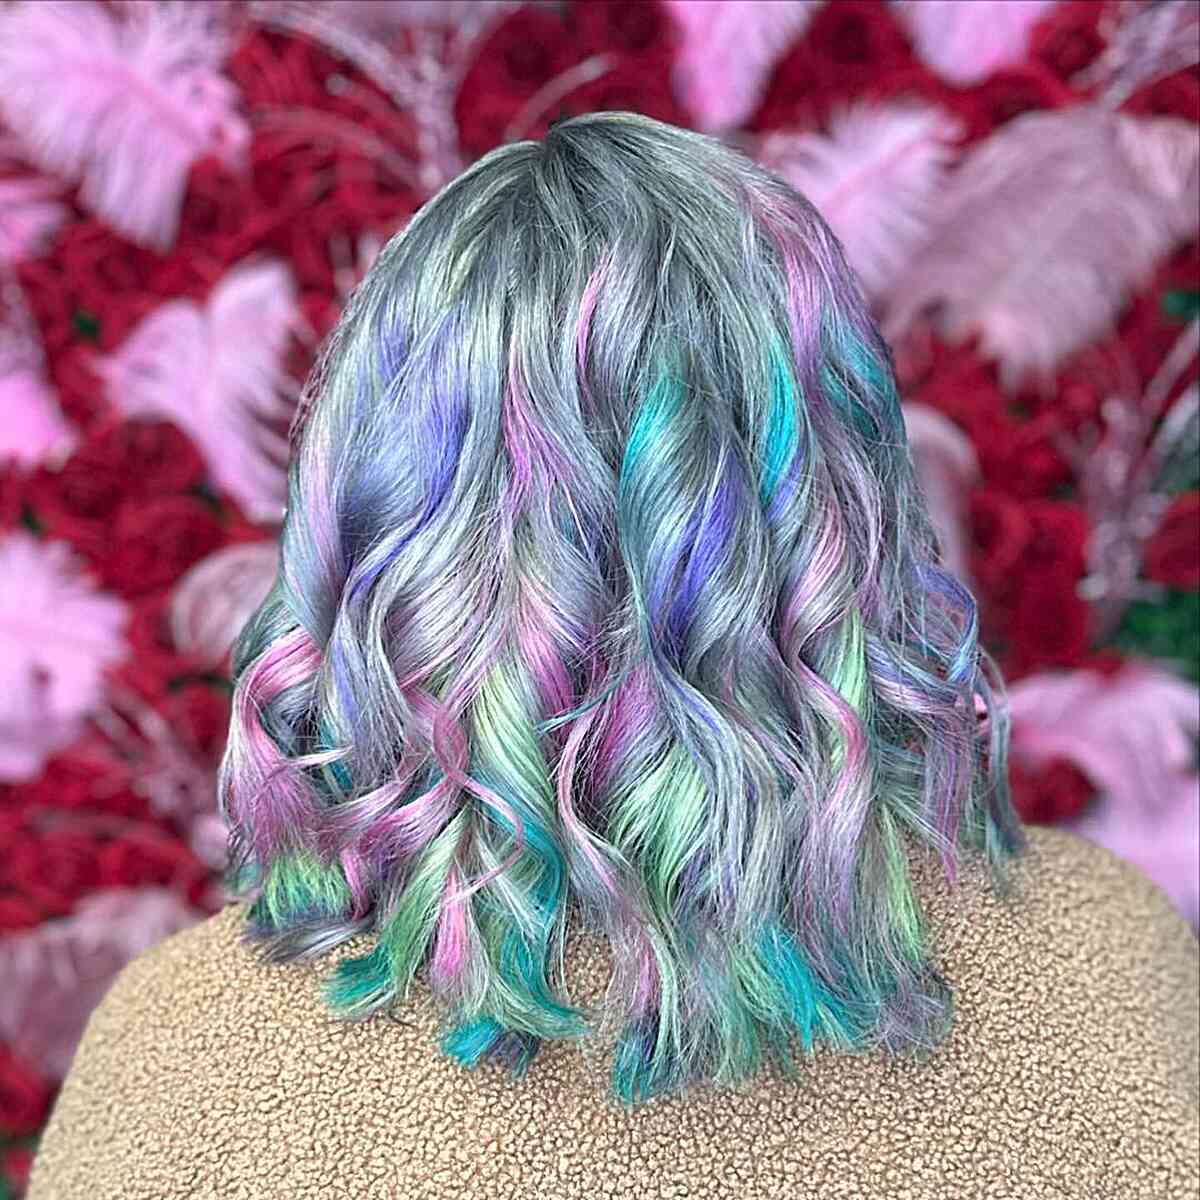 Medium Silver Hair with Pastel Cotton Candy Highlights